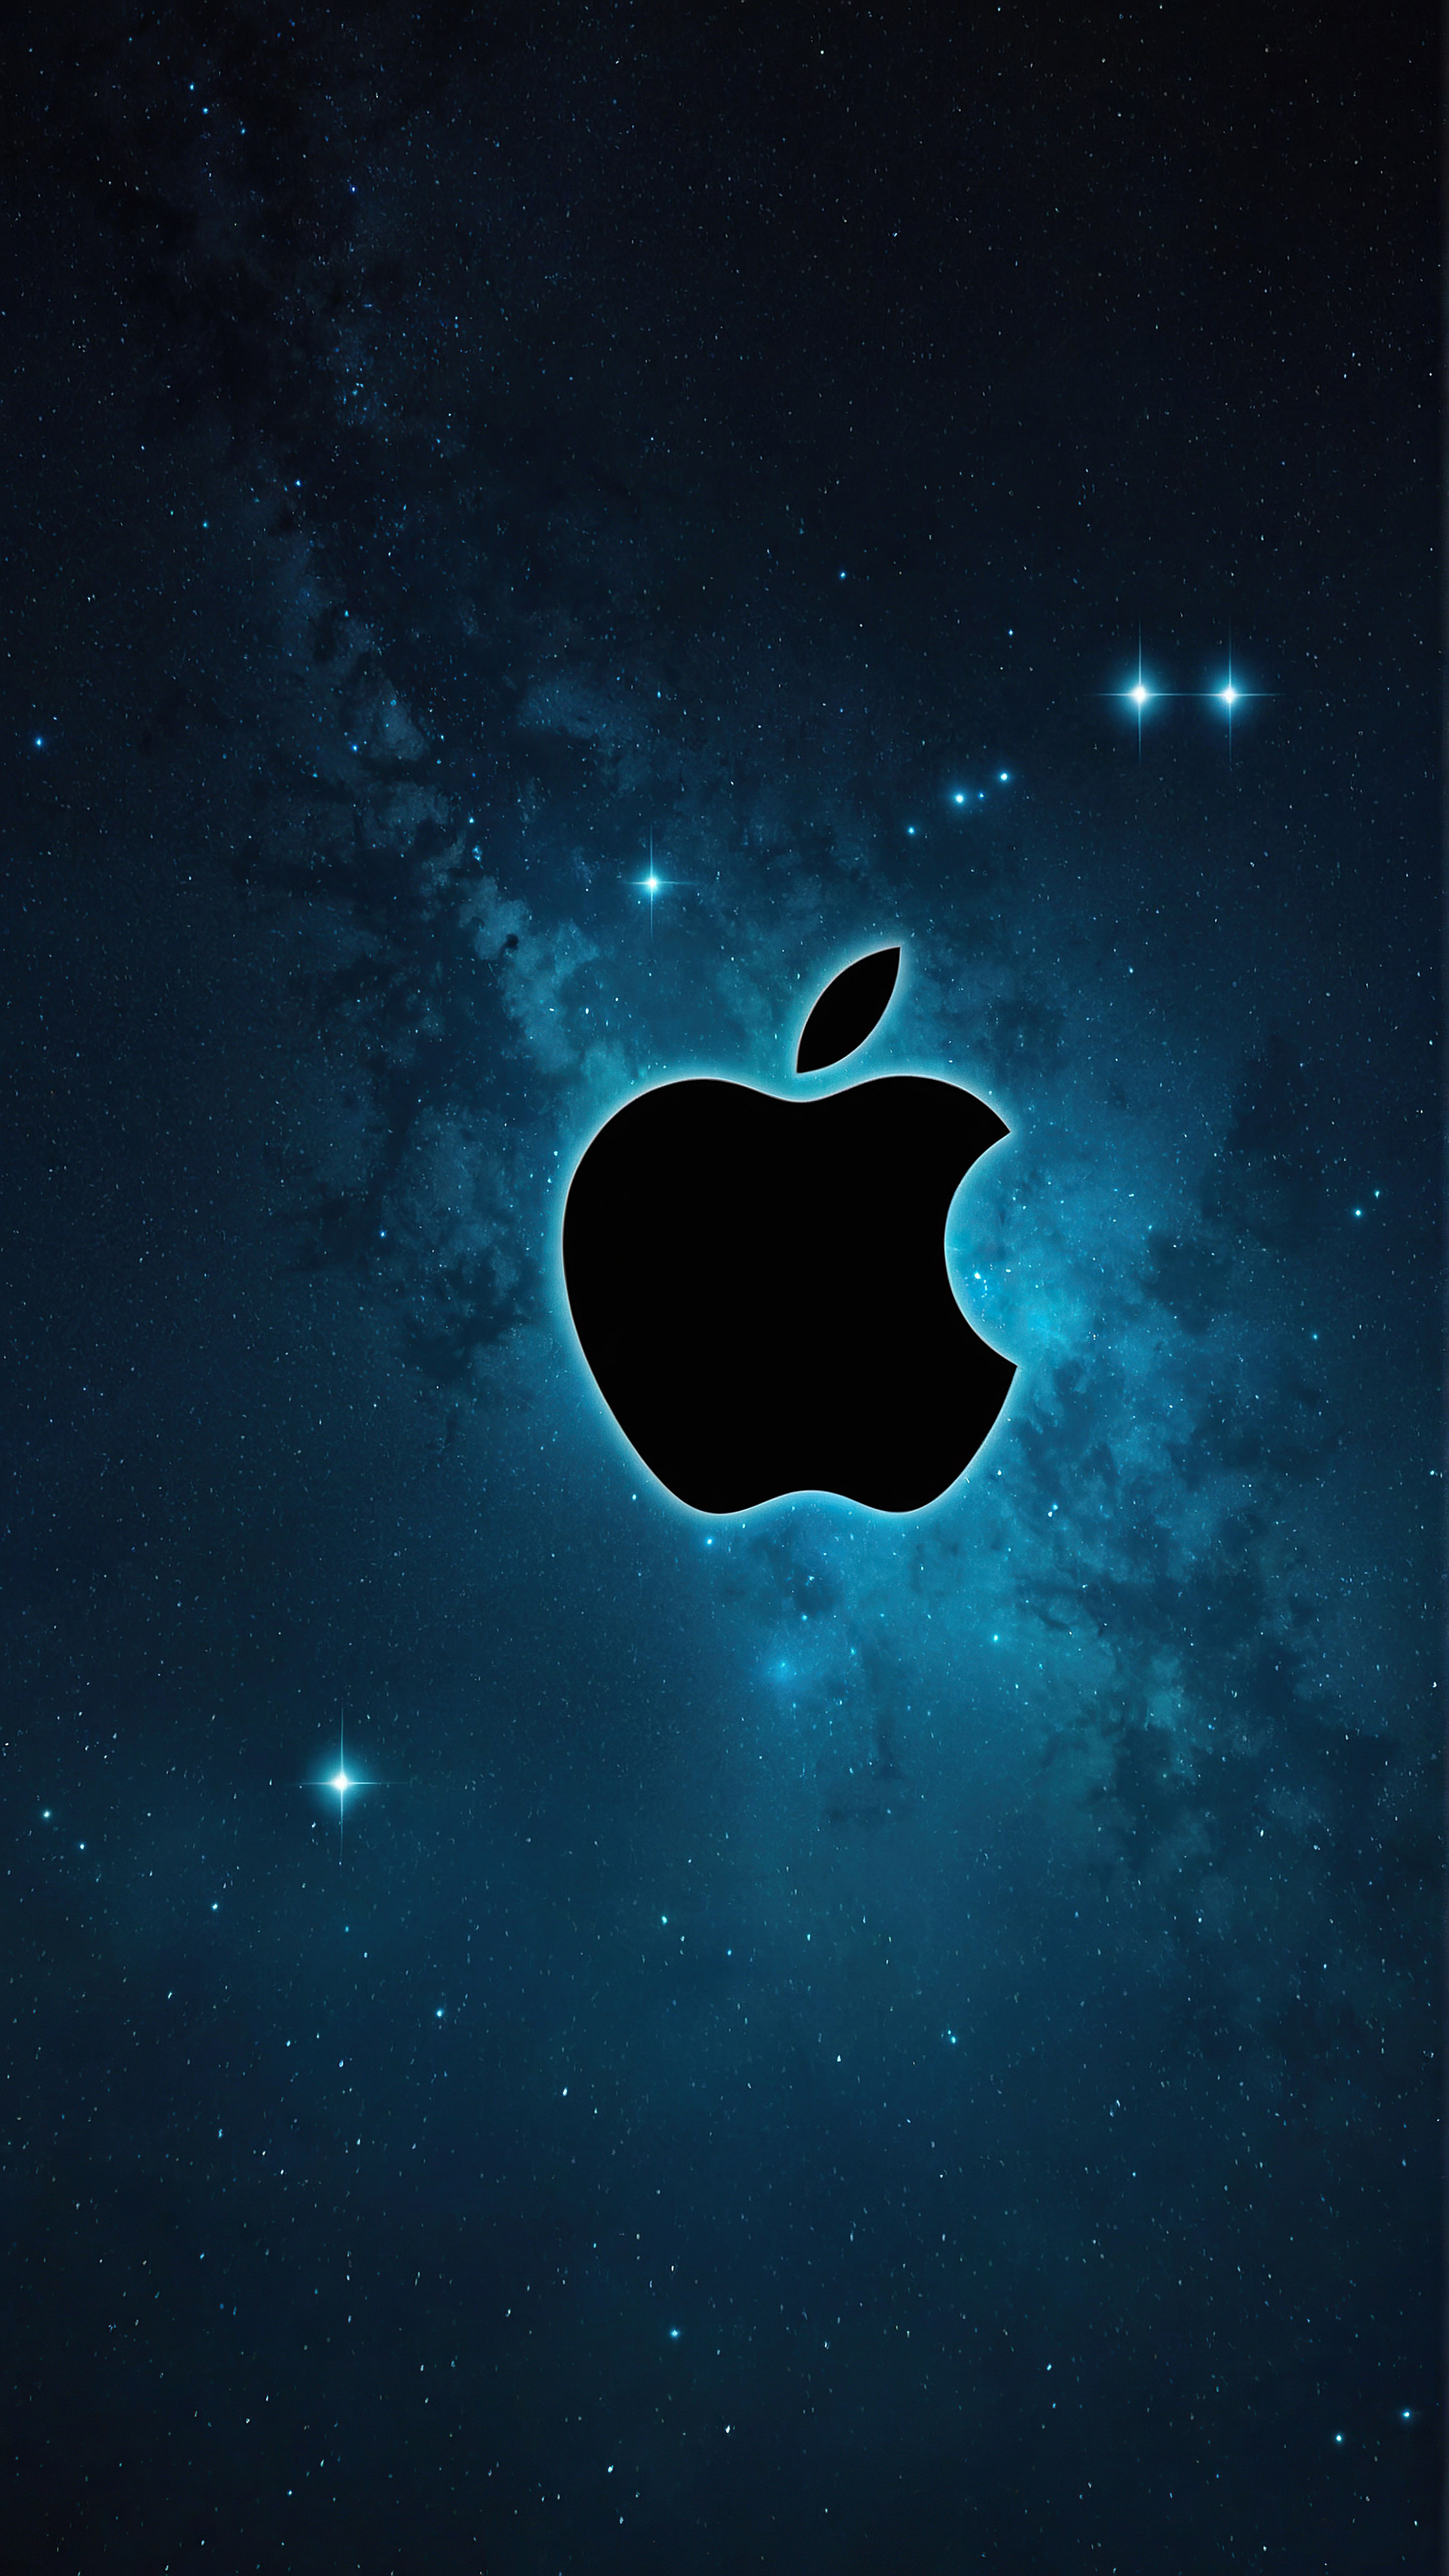 Experience the speed and power of change with our iPhone best background, showcasing the sleek, black Apple logo, centrally positioned against a mesmerizing backdrop of blue and turquoise hues, resembling a starry night sky.